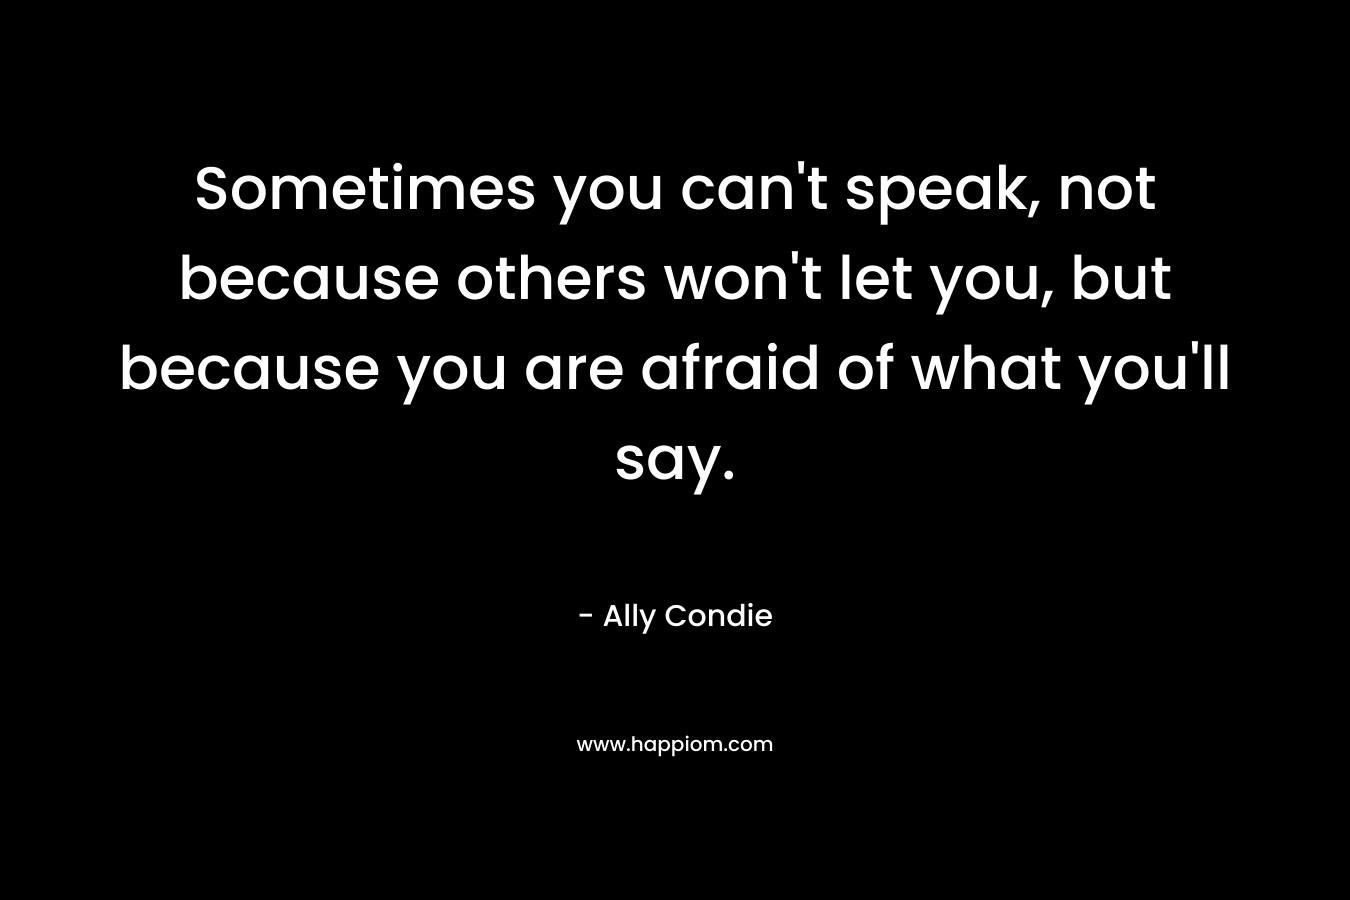 Sometimes you can't speak, not because others won't let you, but because you are afraid of what you'll say.